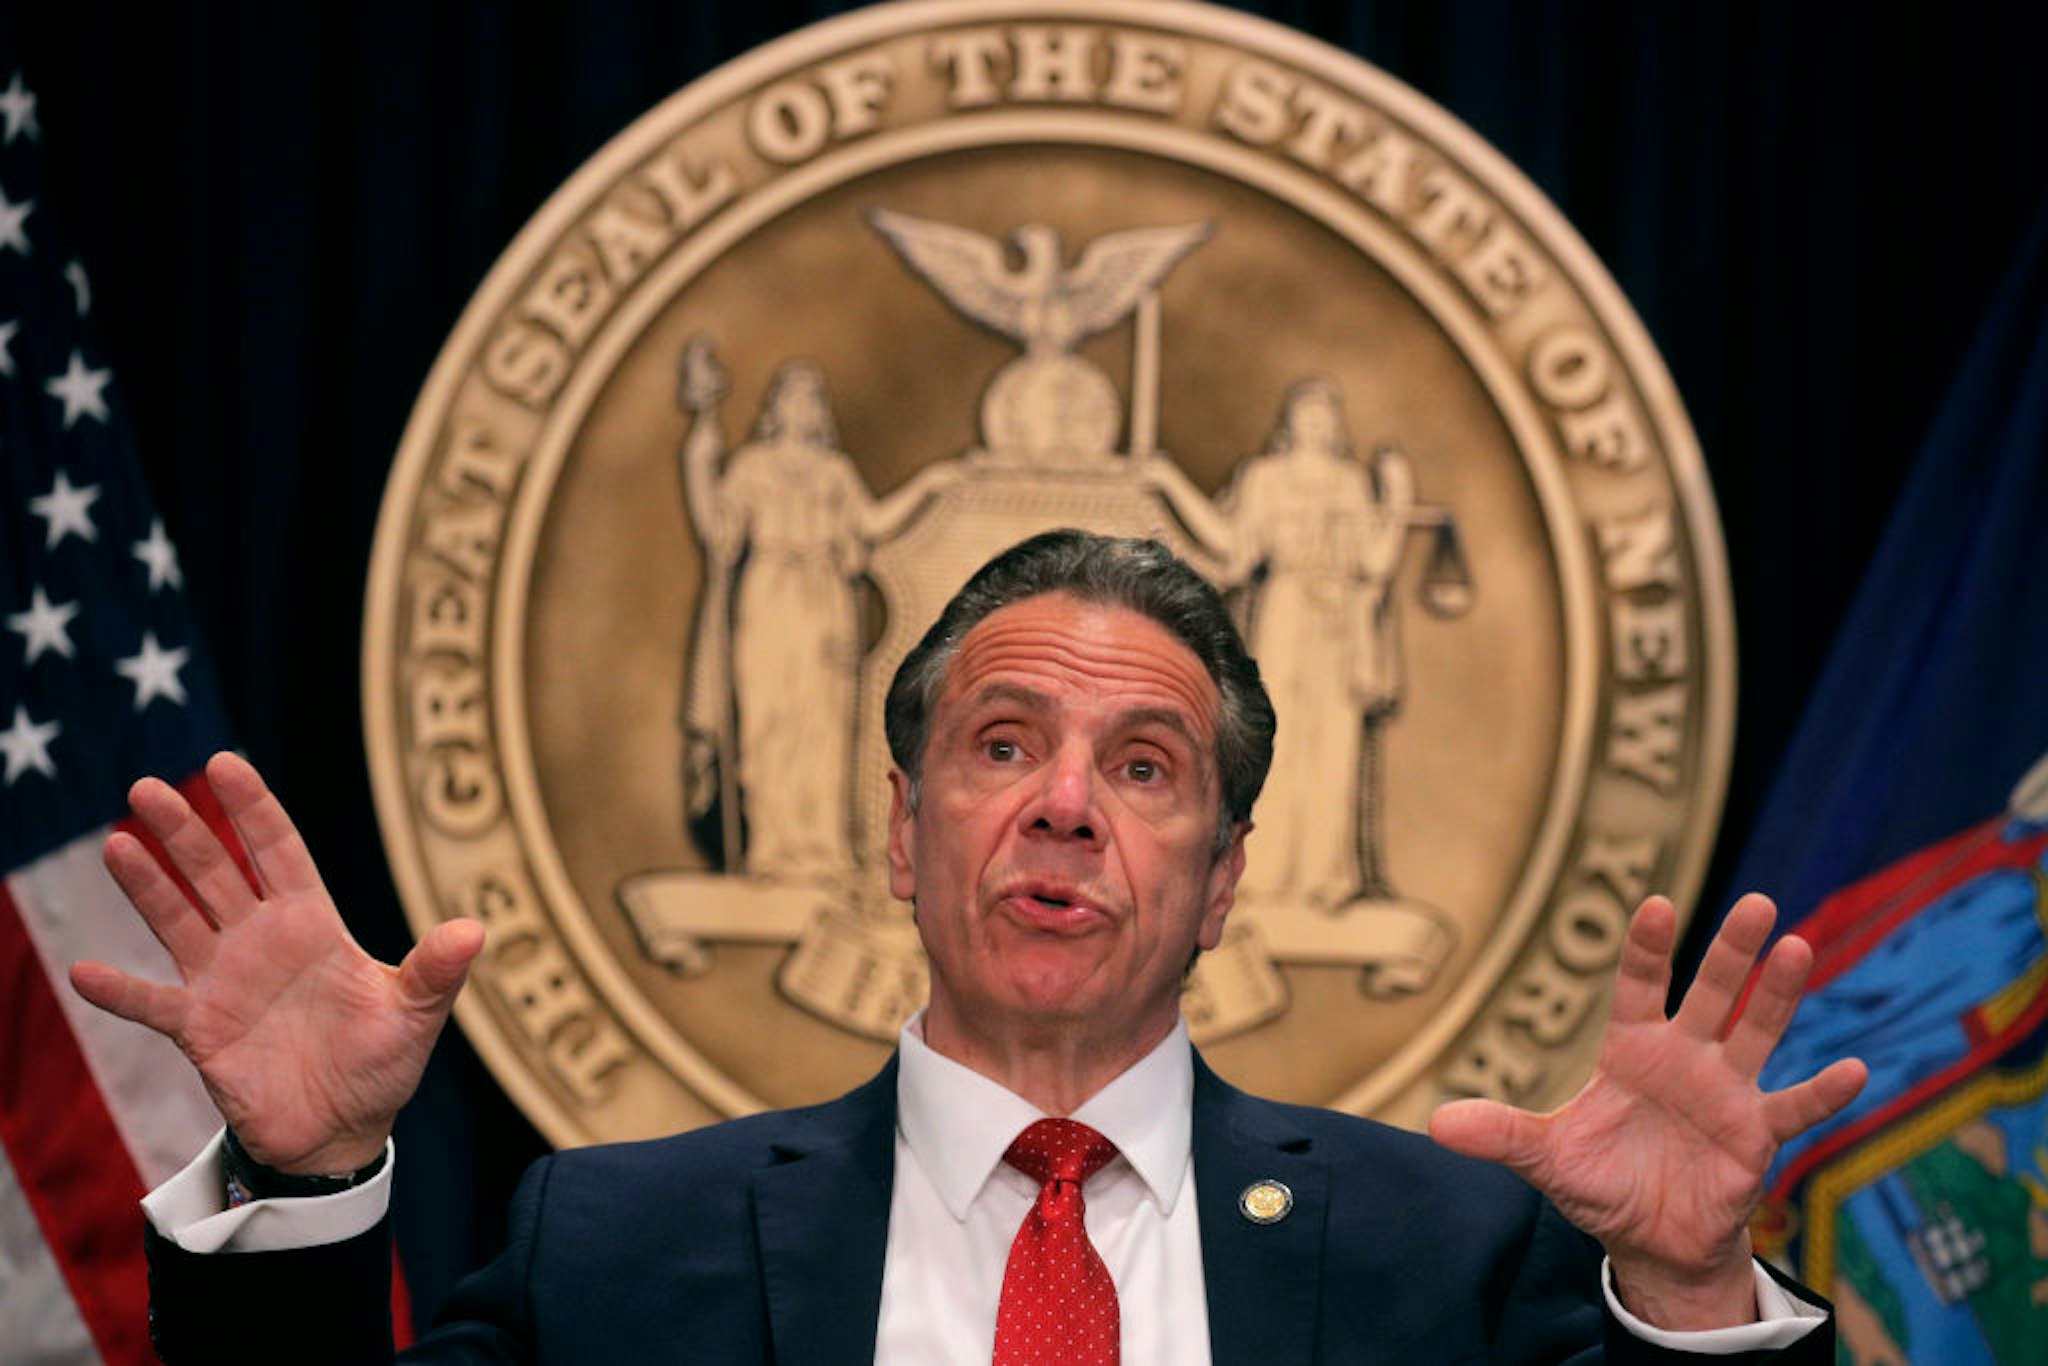 New York Governor Andrew Cuomo speaks during a news conference at his office on March 24, 2021 in New York City.